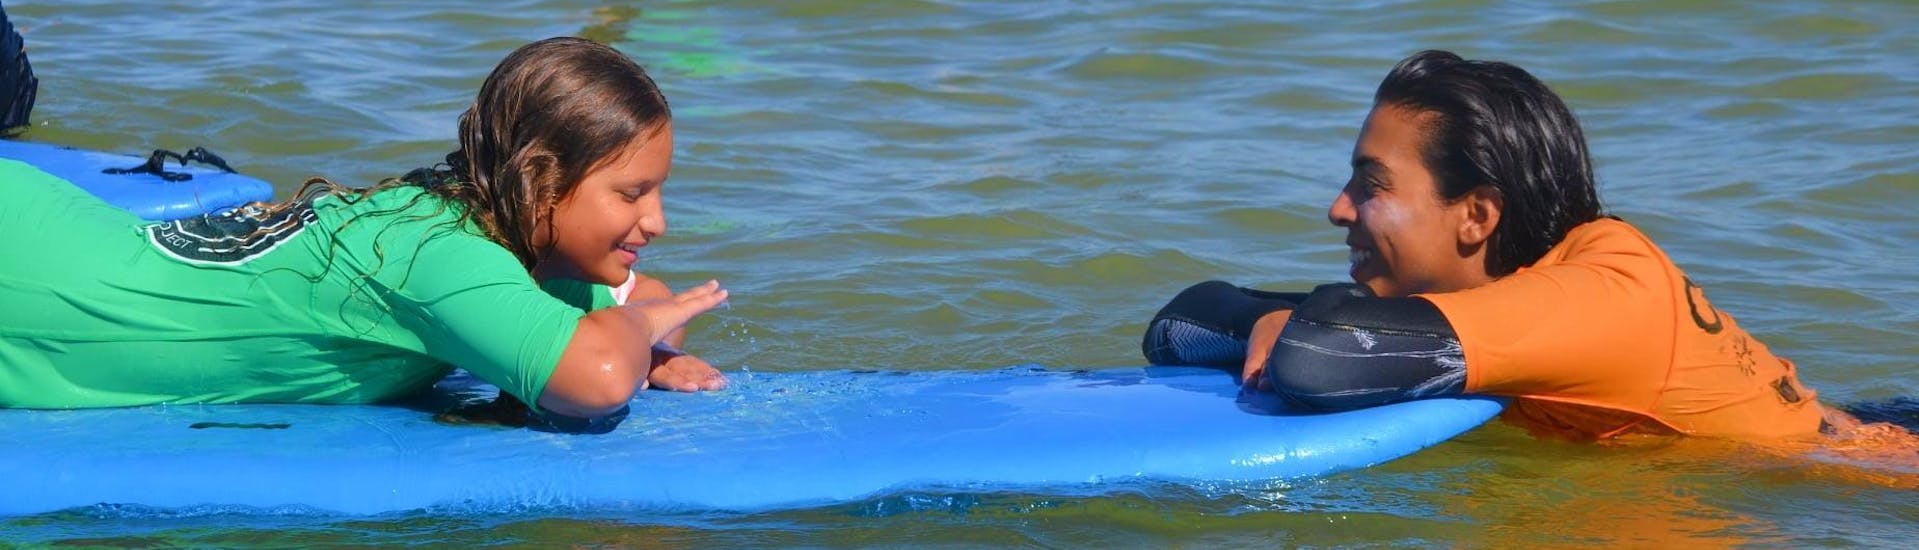 A surf instructor from Vilamoura Surf Project teaches a child the right technique in the sea during the Private Surfing Lessons at Praia da Falésia for all Levels.